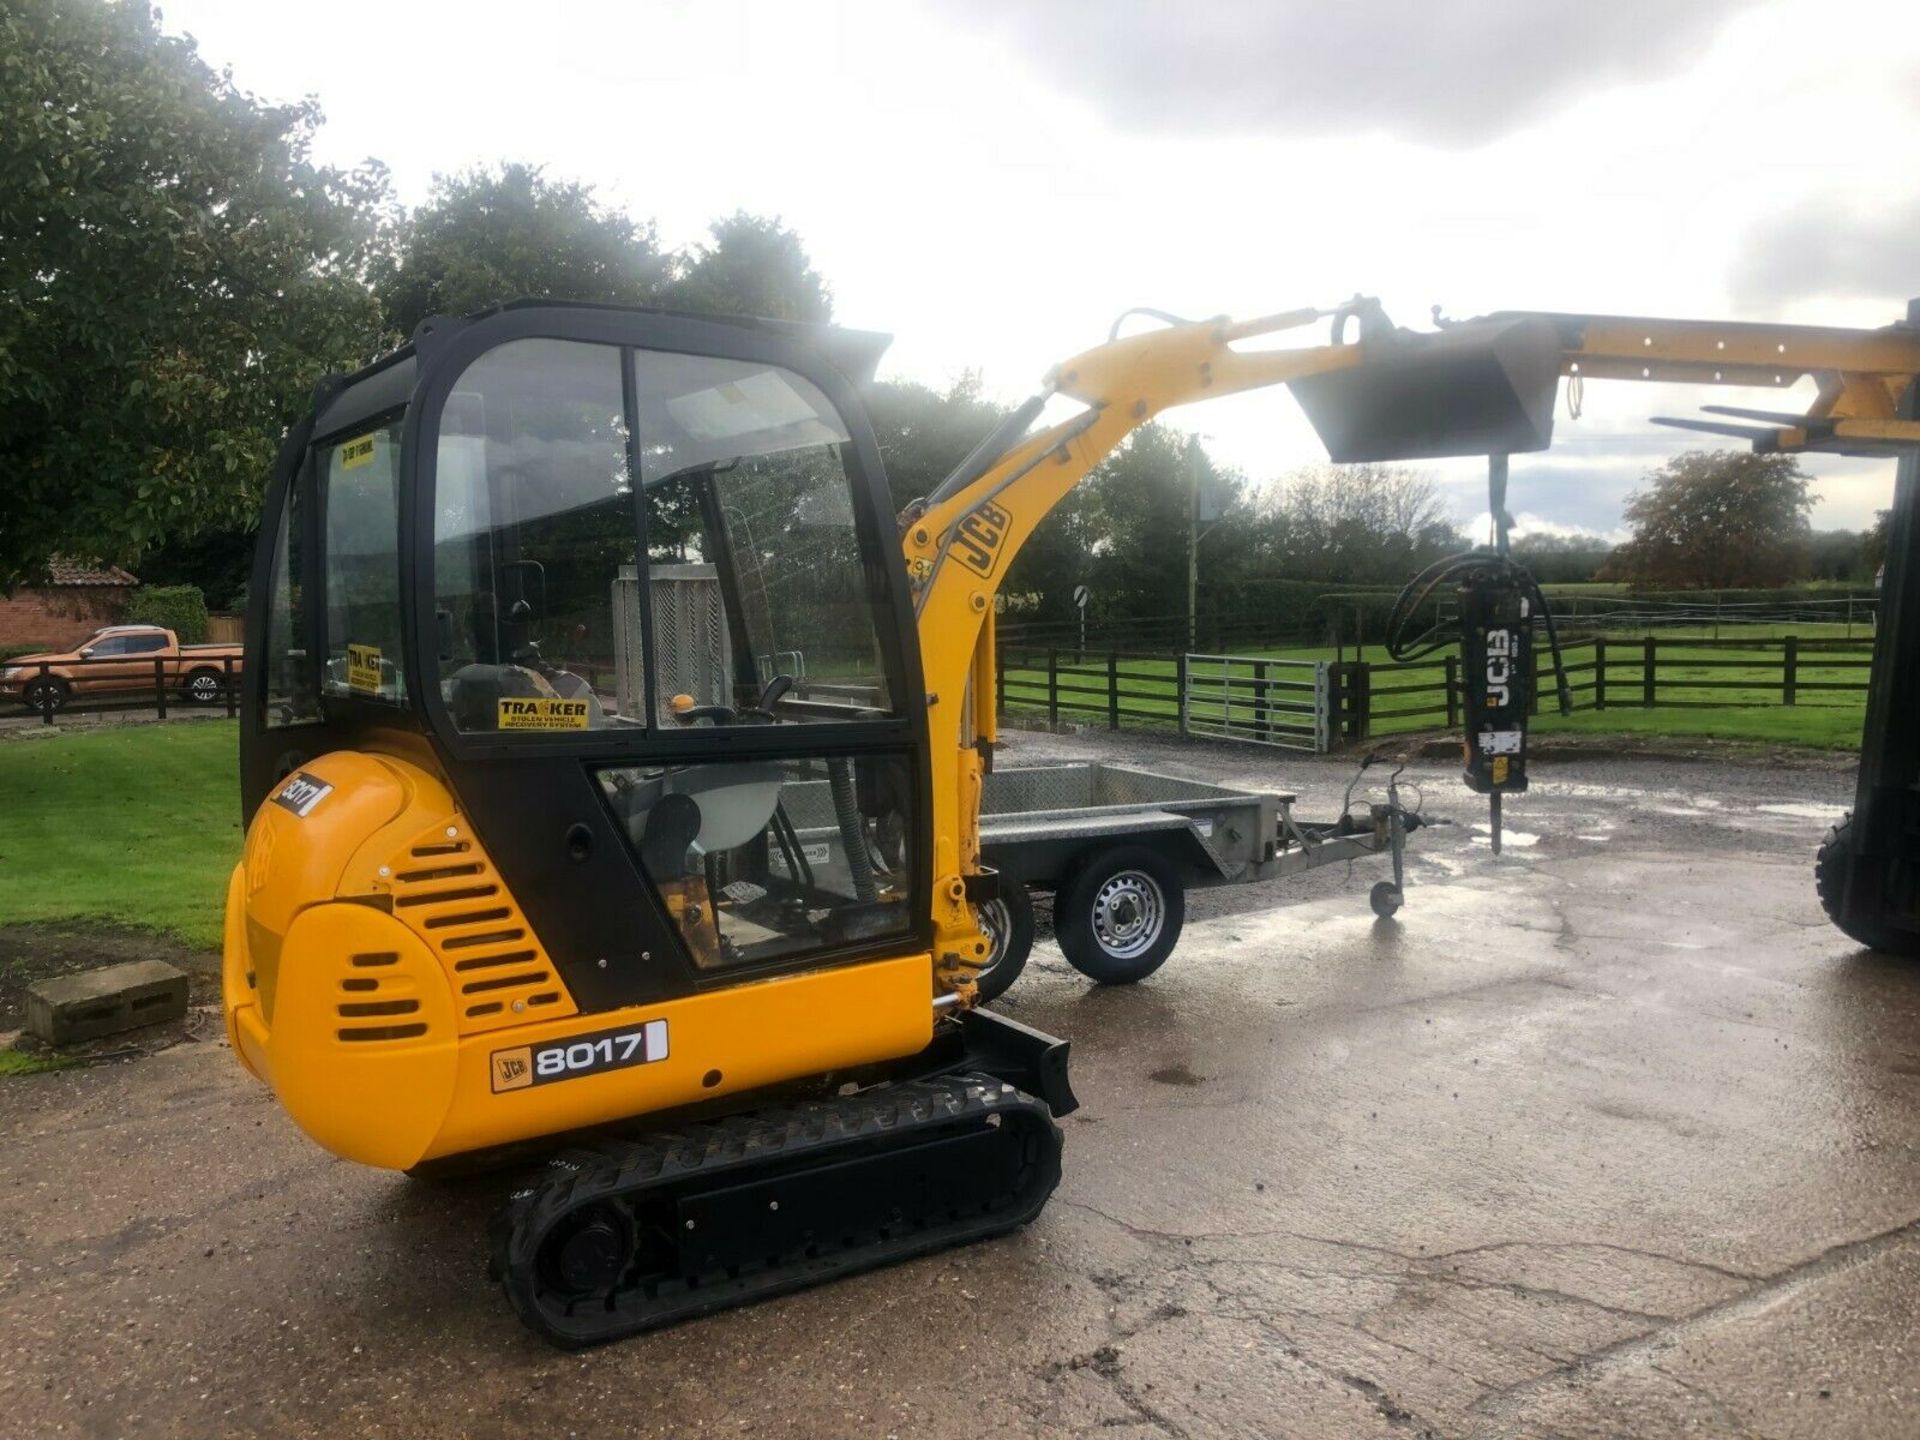 JCB 8017 EXCAVATOR, EXPANDING TRACKS, 2004, 2 SPEED TRACKING, NEW TRACKS, SERVICED, 2636 HOURS. - Image 4 of 10